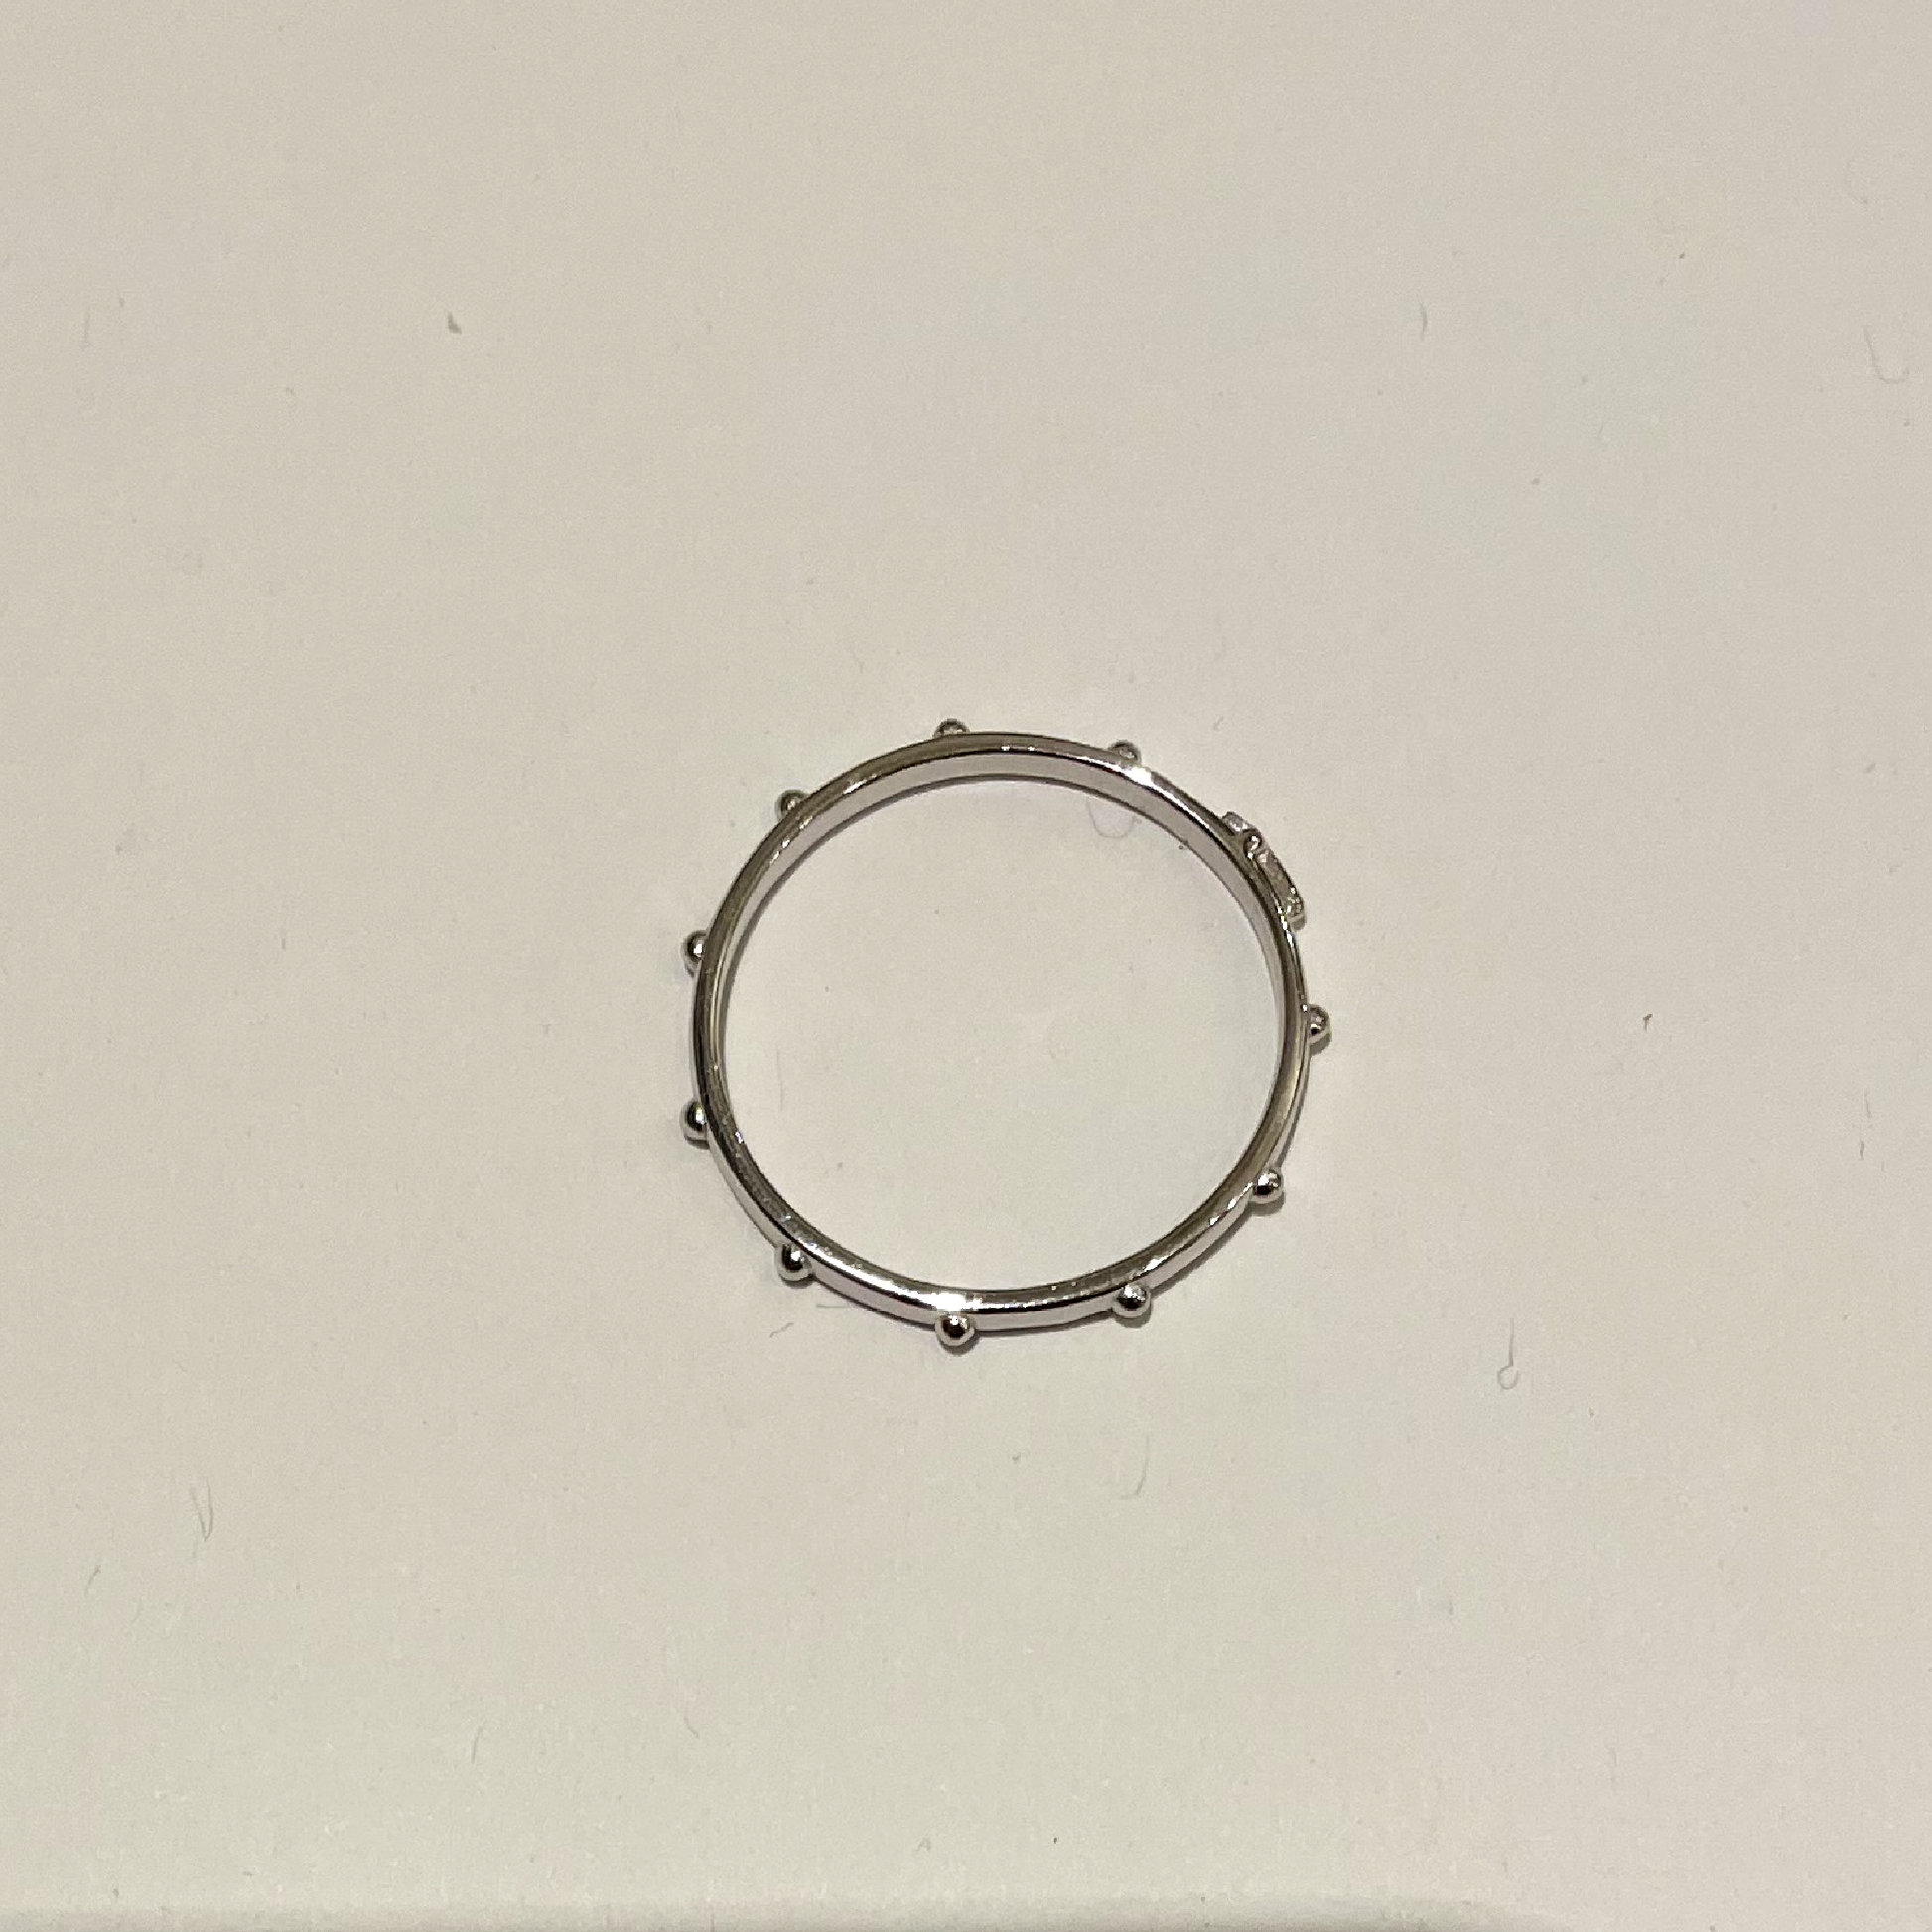 Simple thin silver ring with 11 bulging dots on the environment of the ring.